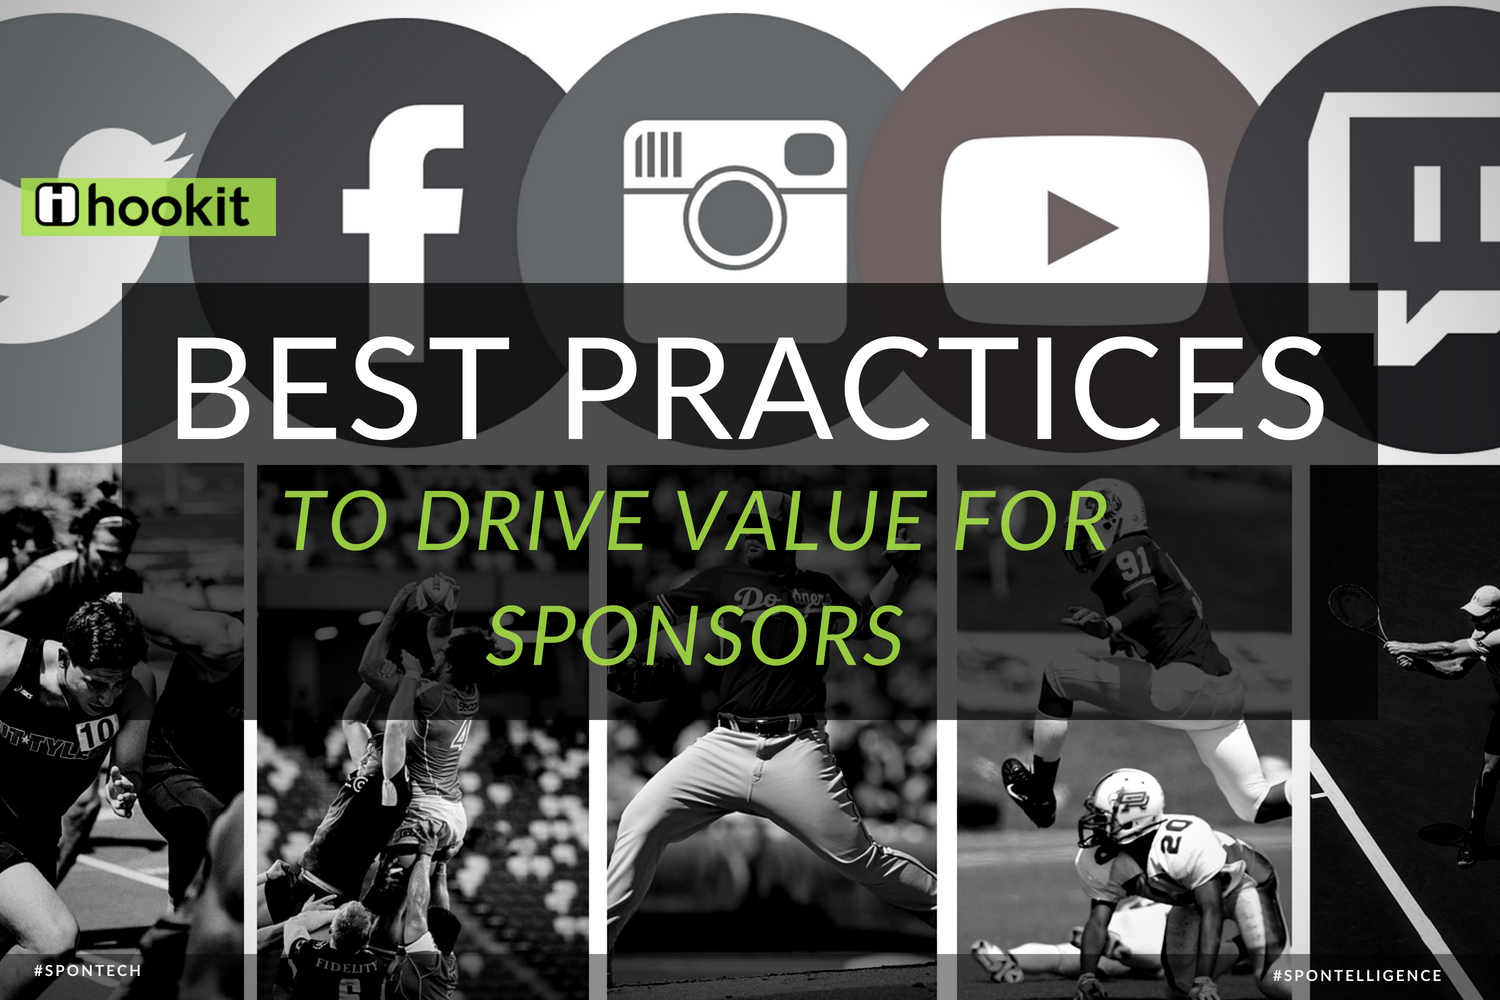 Best practices to drive value for sponsors